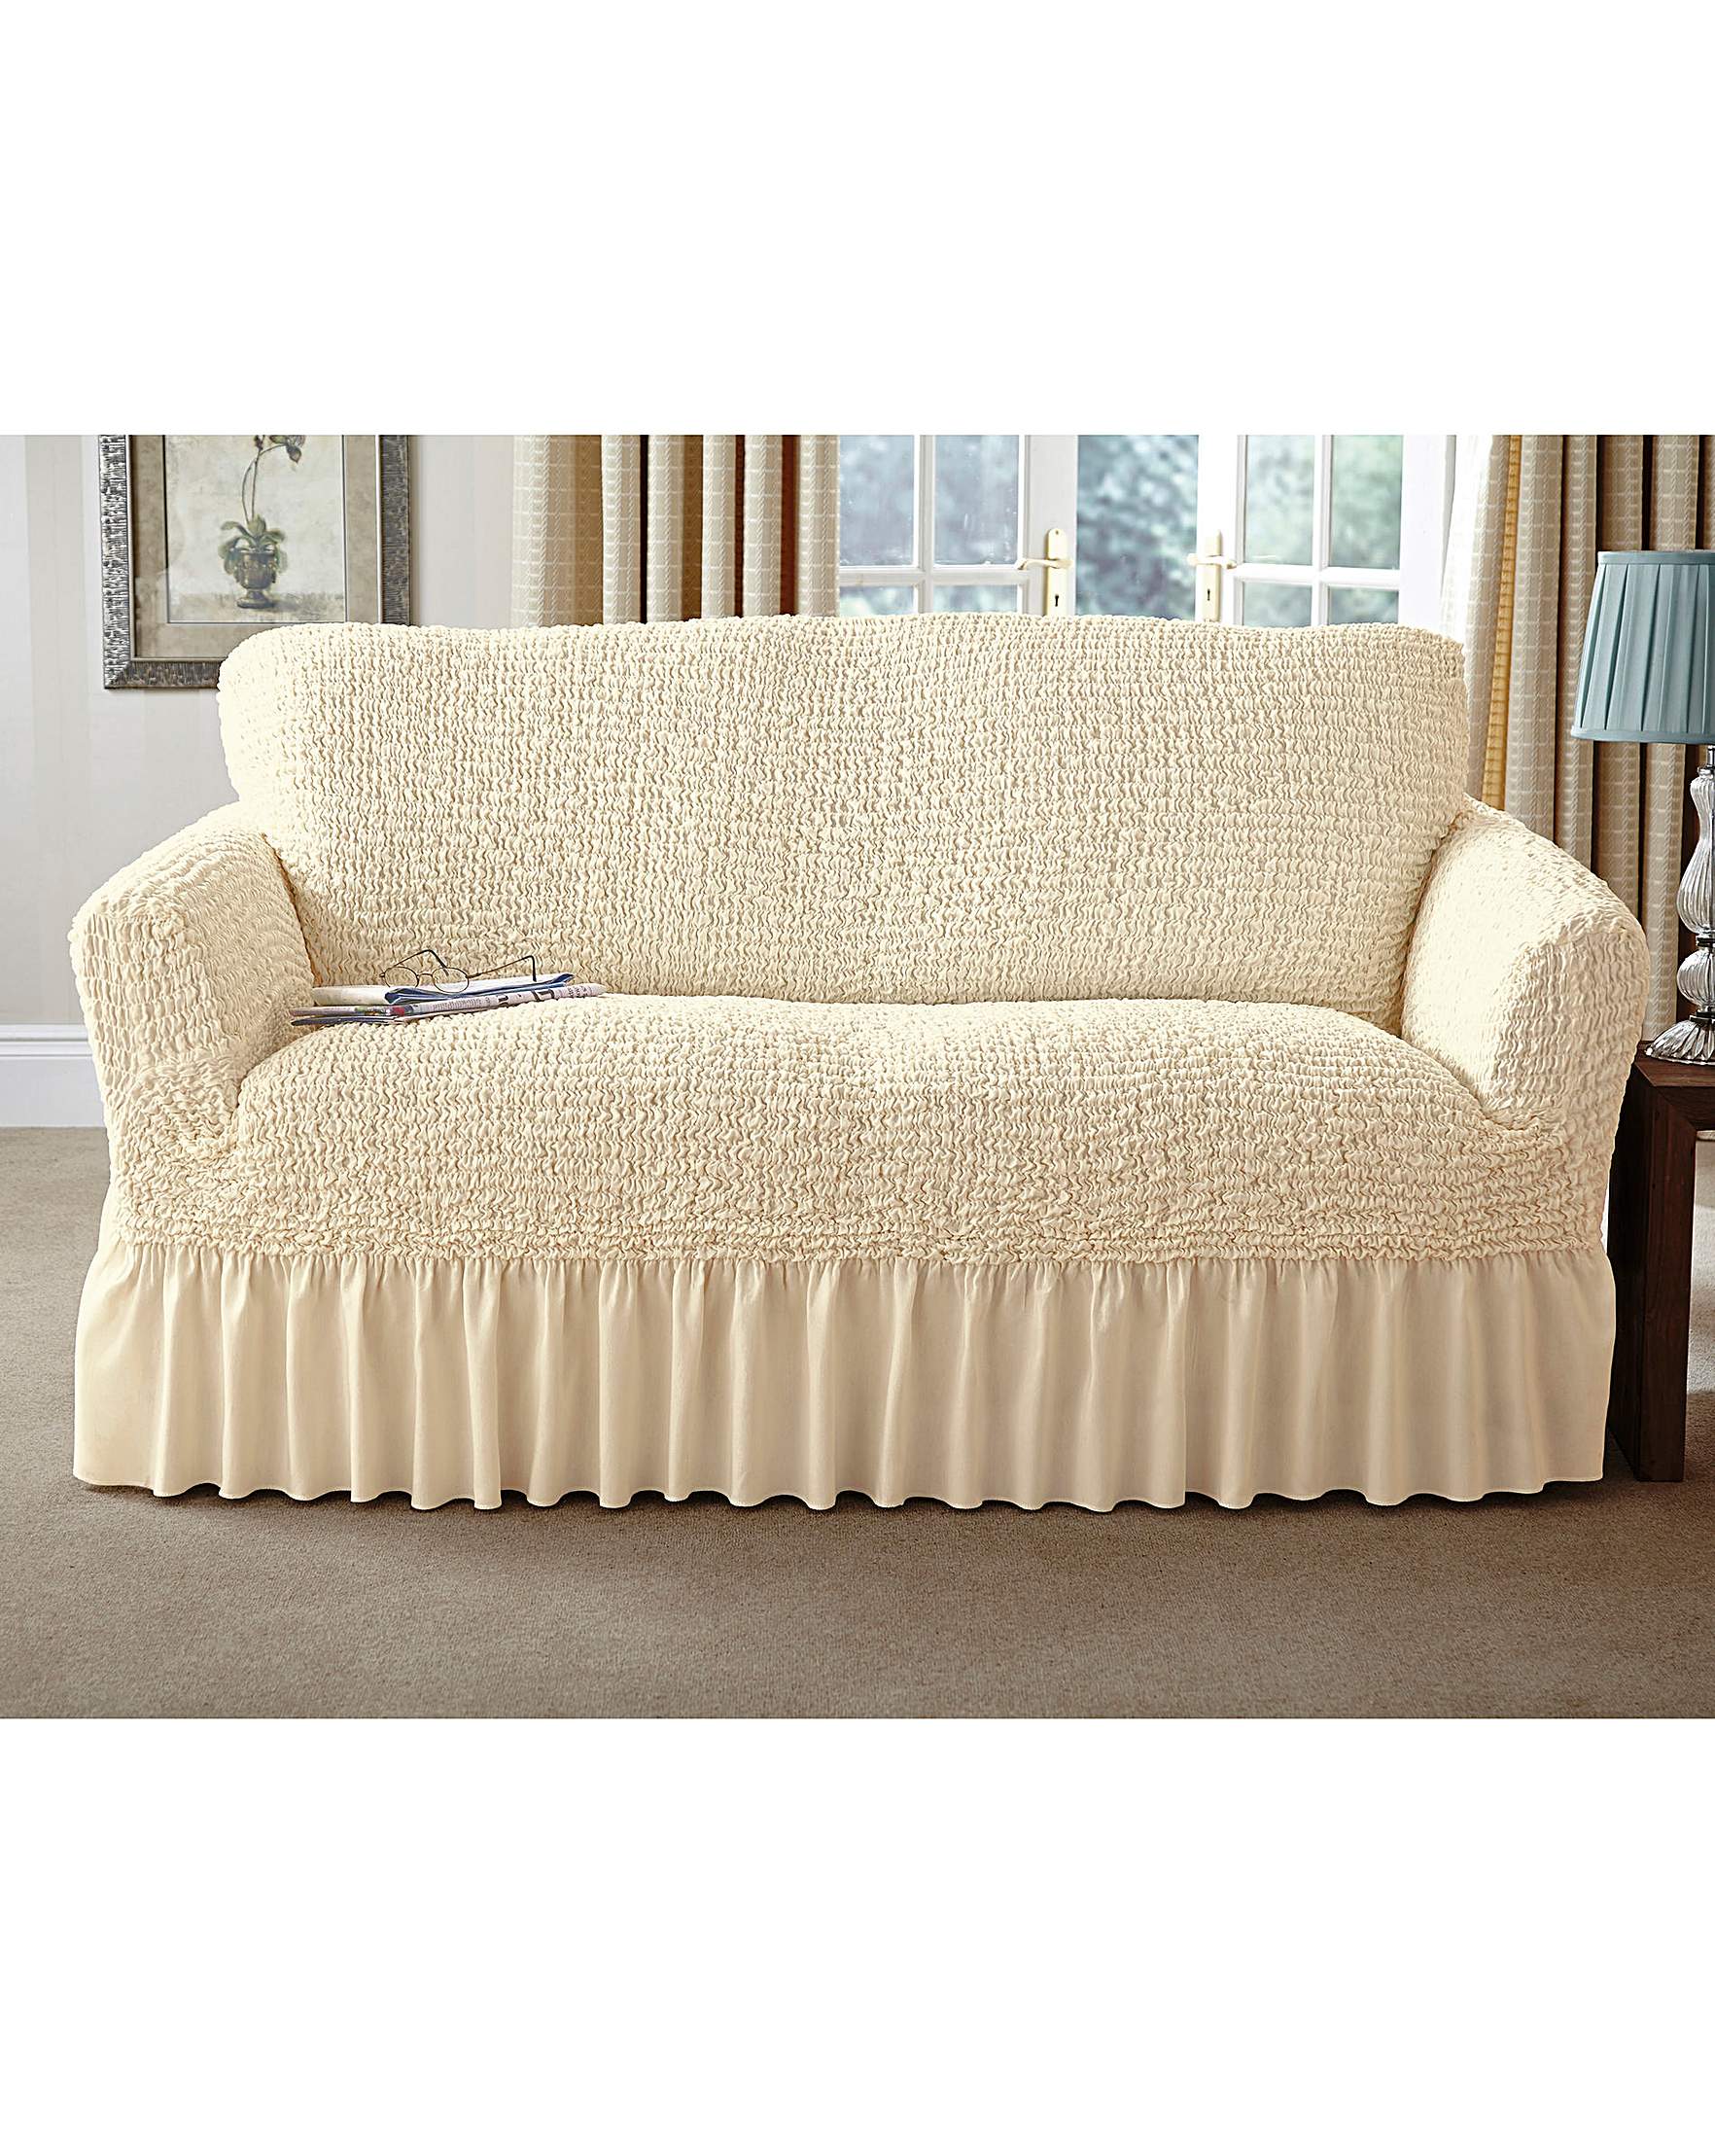 Settee Covers Loose Sofa Covers Replacement Sofa Covers Arm